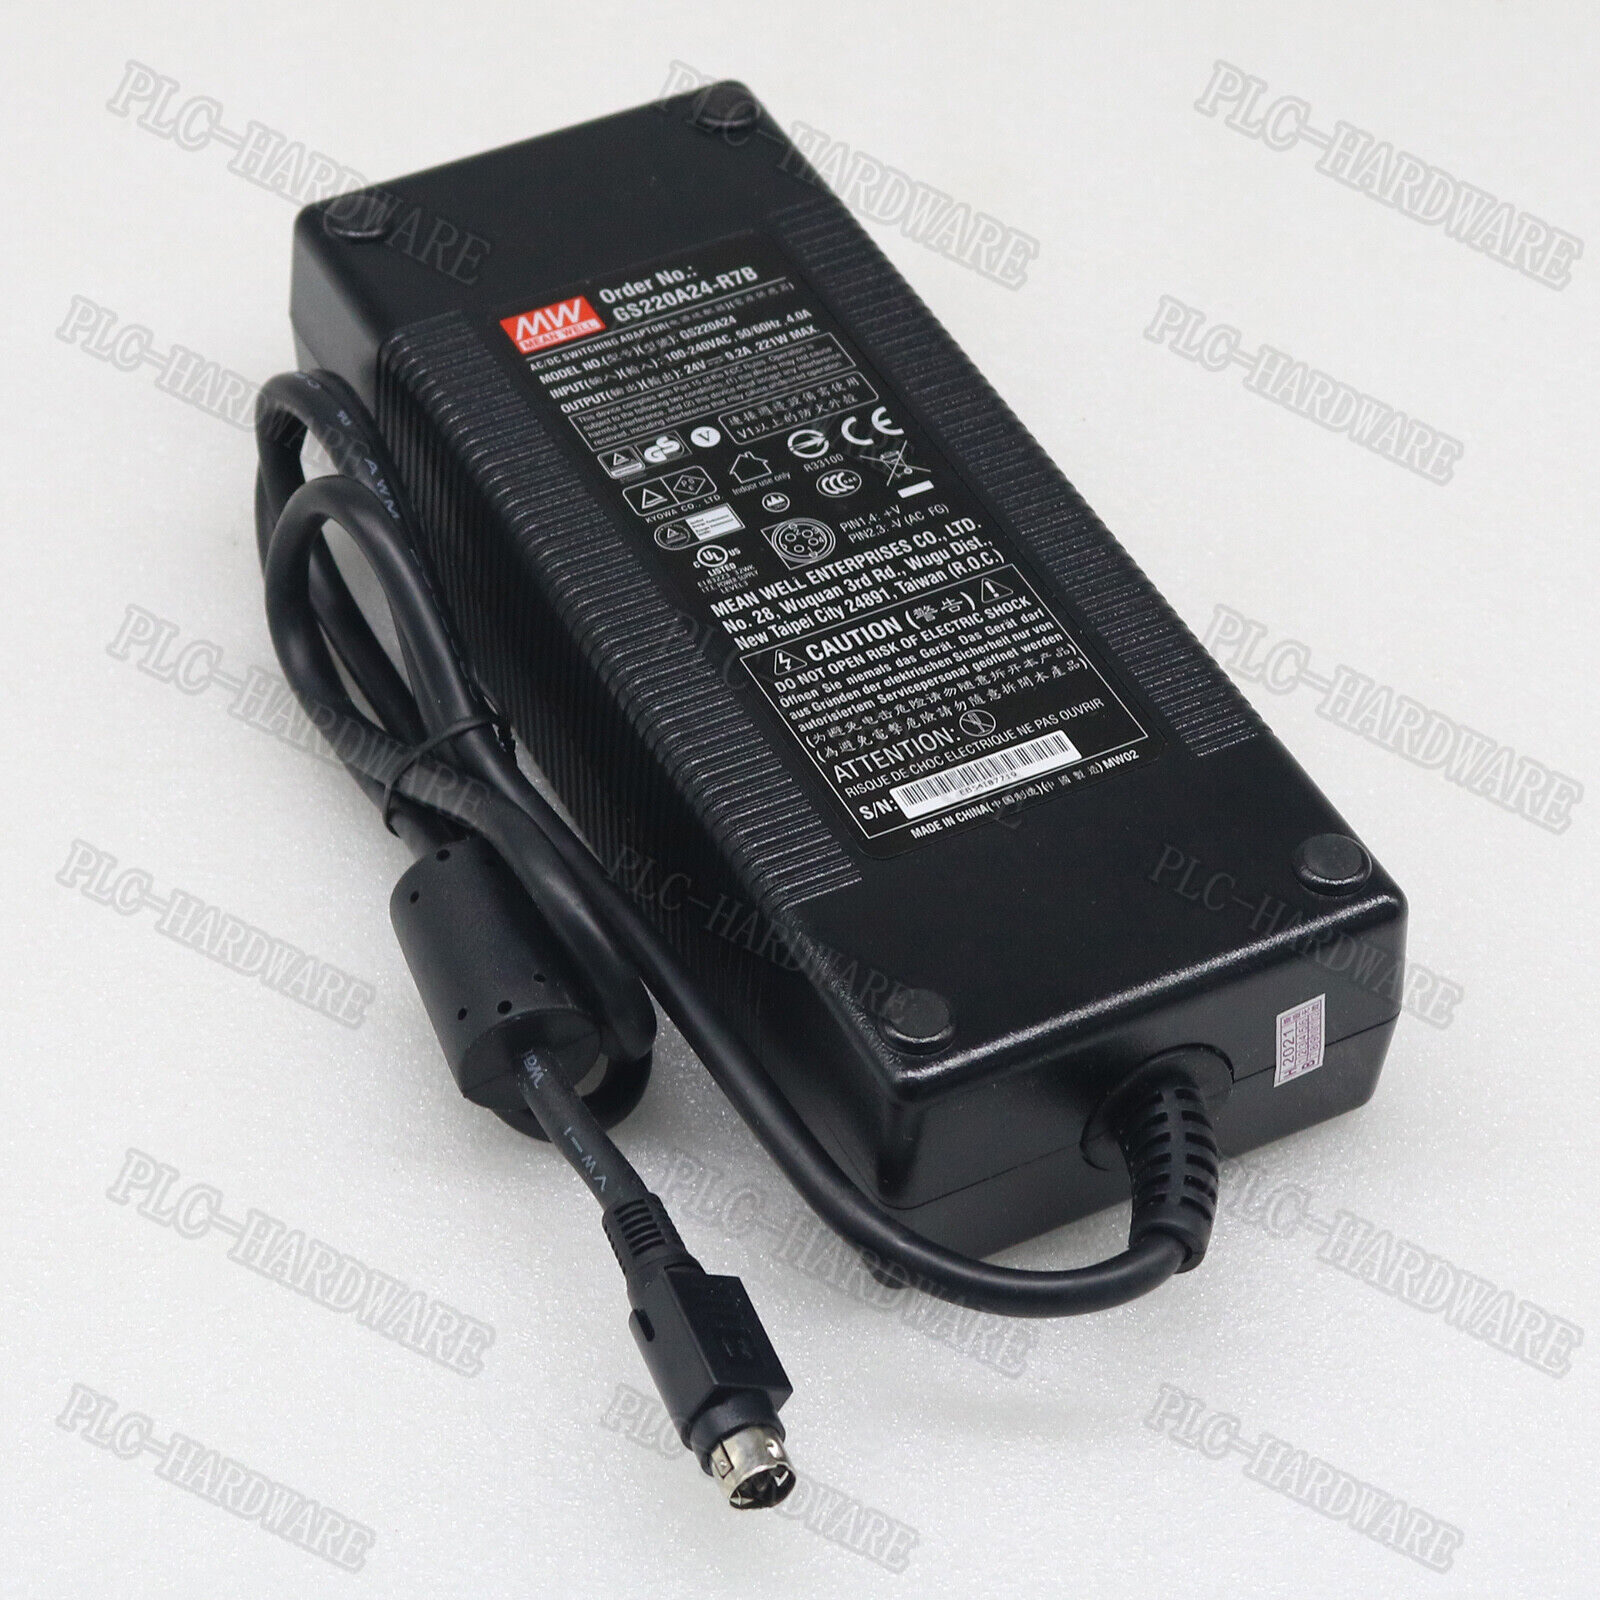 New GS220A24-R7B 24V 9.2A power supply For MEAN WELL Brand: MEAN WELL MPN: GS220A24-R7B Model: GS220A24-R7B UPC: D - Click Image to Close